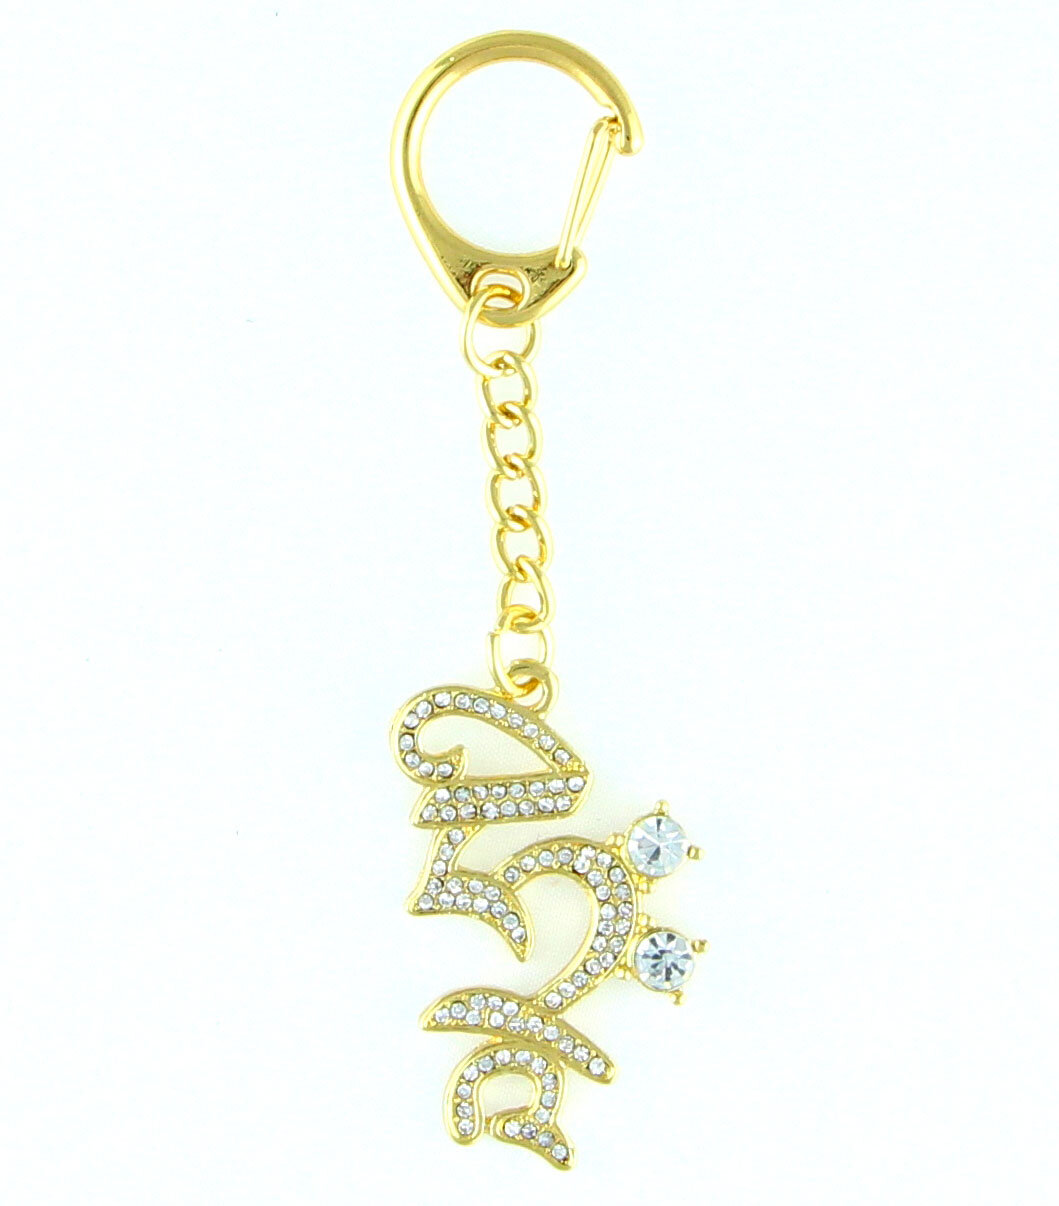 Feng Shui Import Bejeweled Hrih Seed Syllable Amulet Key Chain | Wayfair